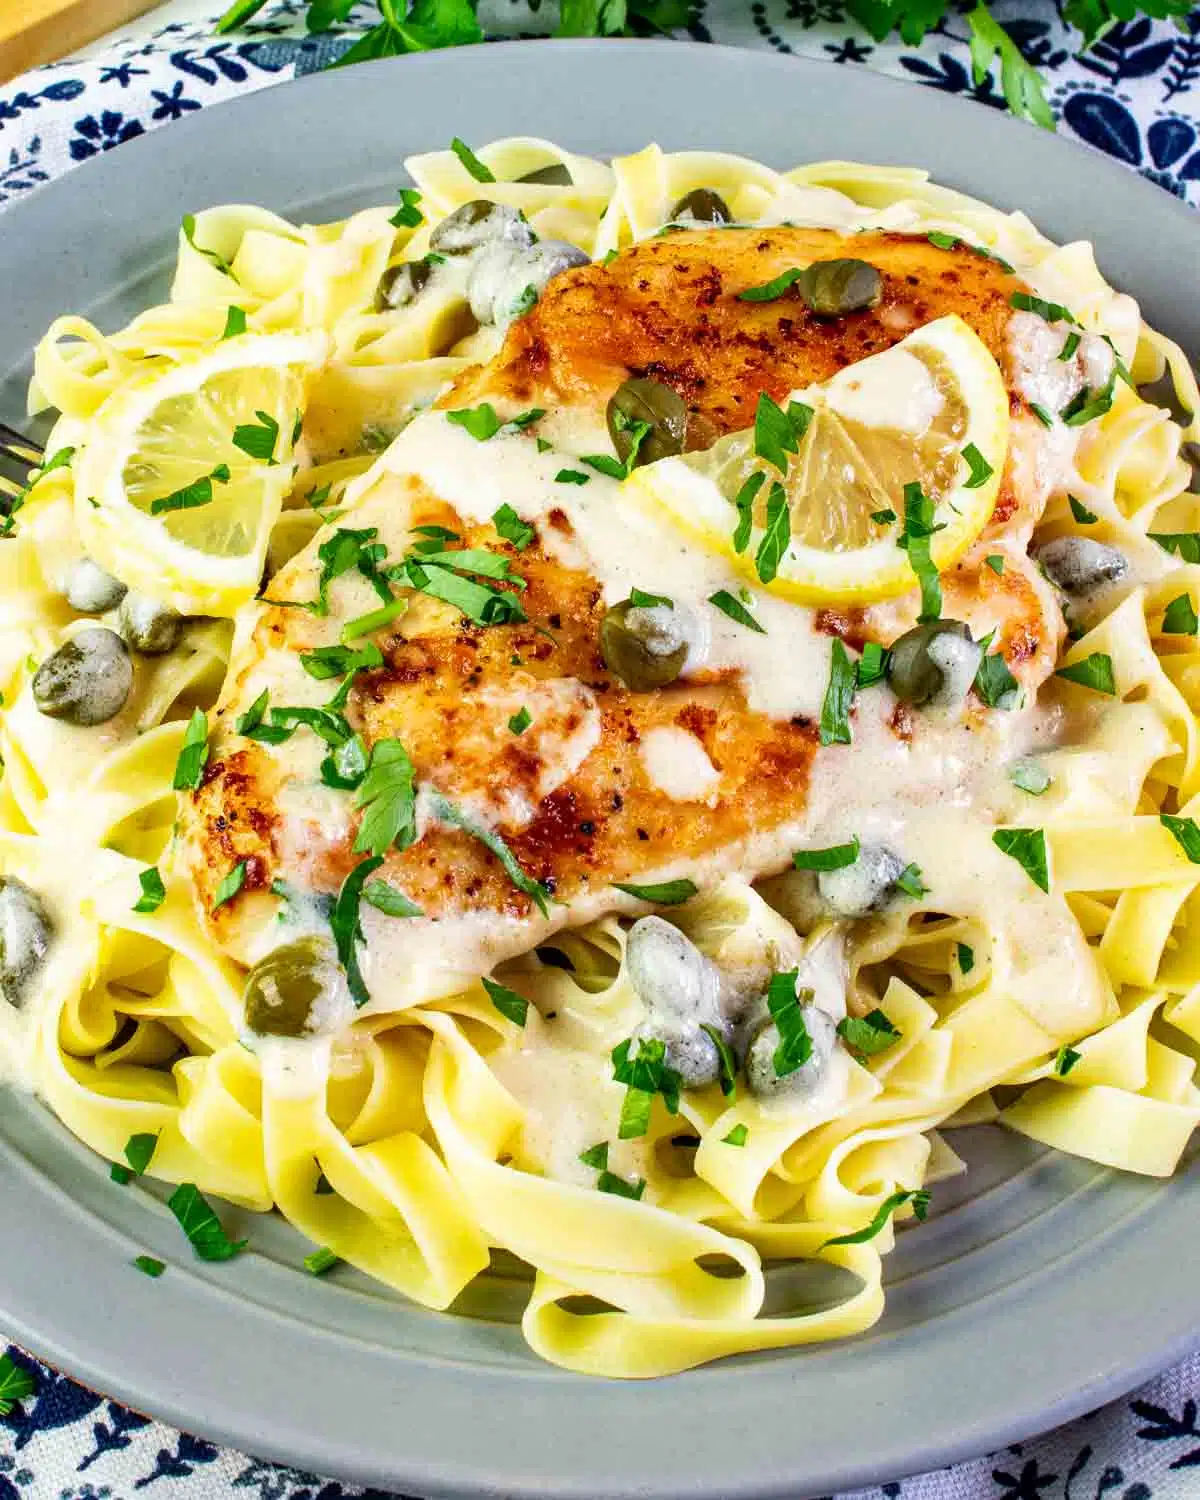 creamy chicken piccata on a bed of noodles.